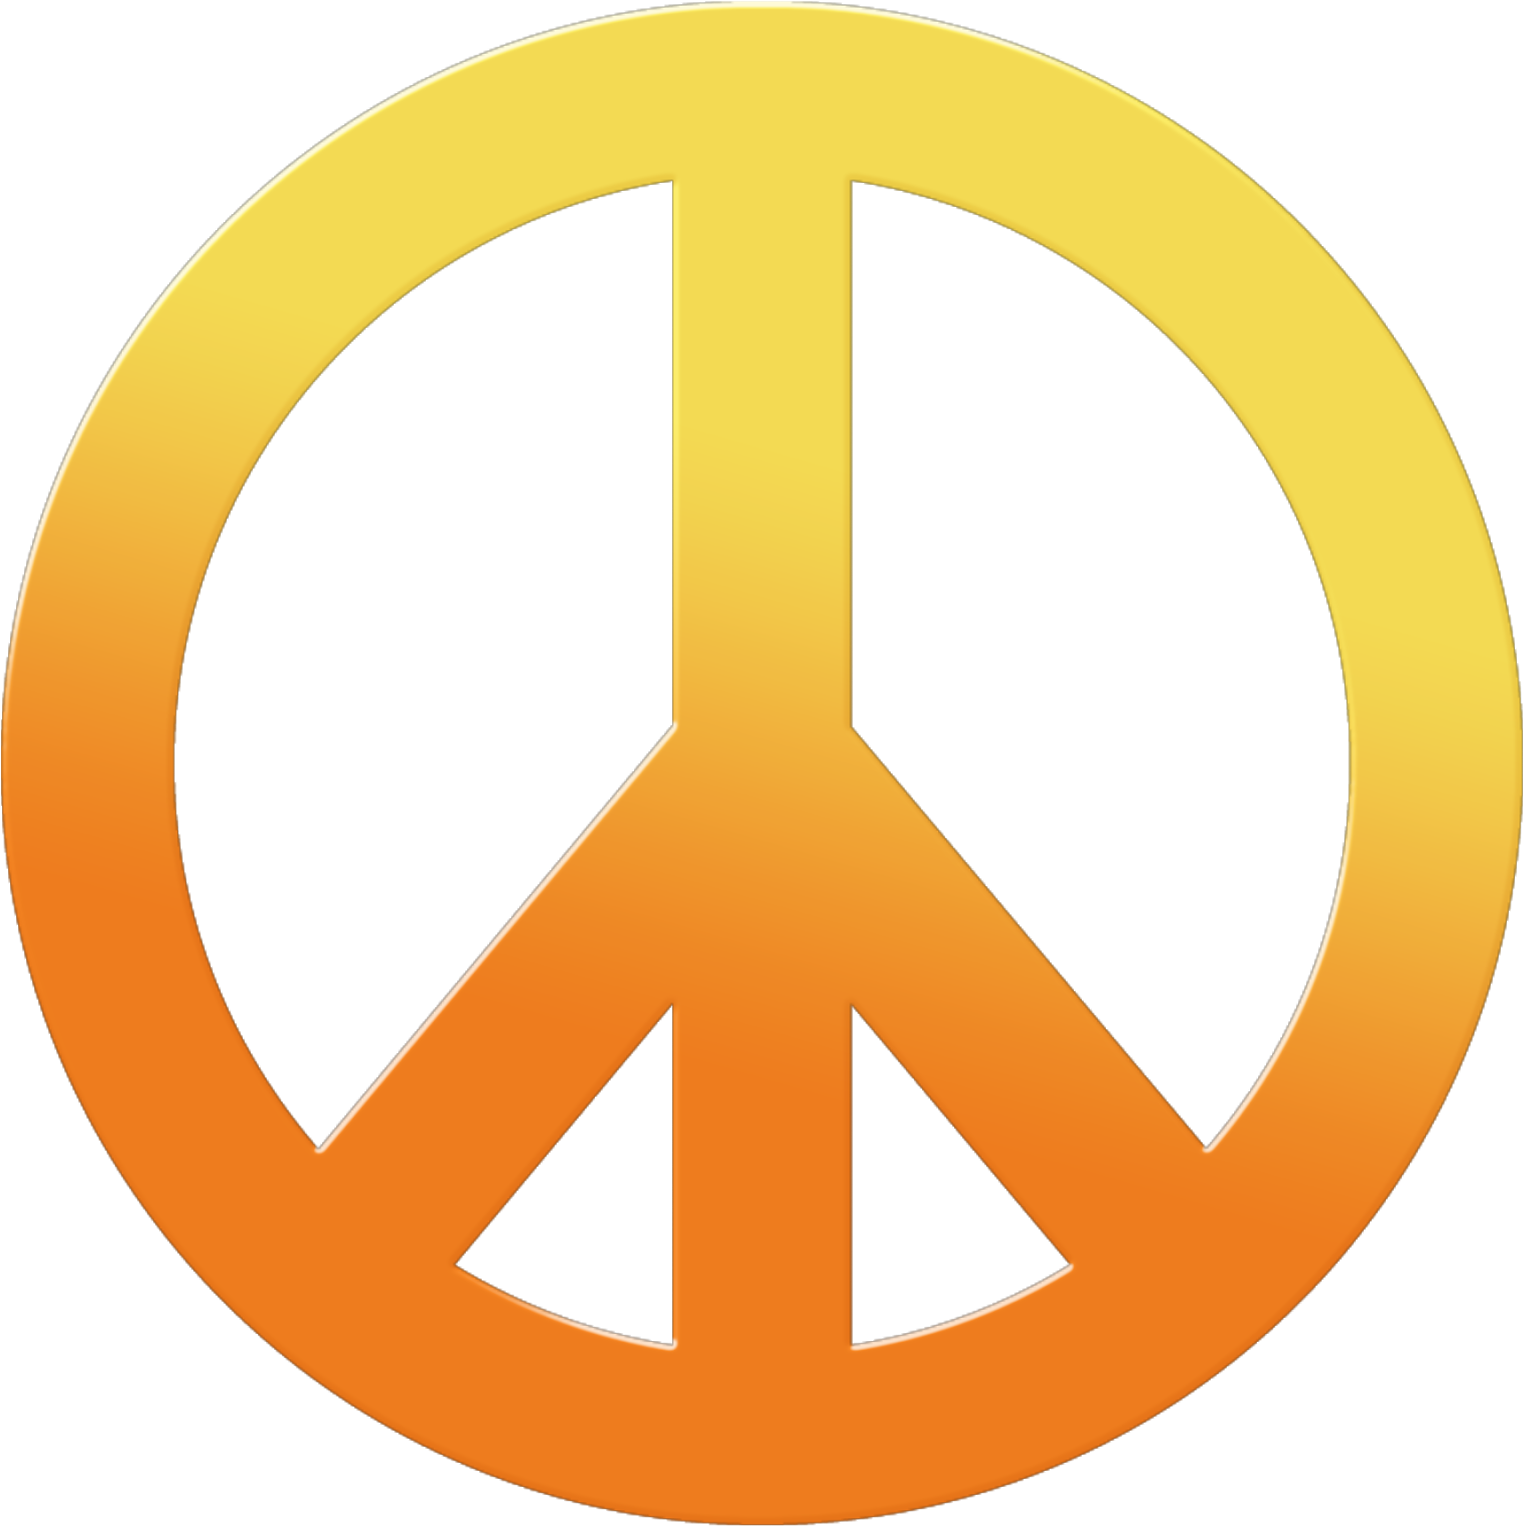 Peace Sign Hd - Peace Sign Png (1600x1600)